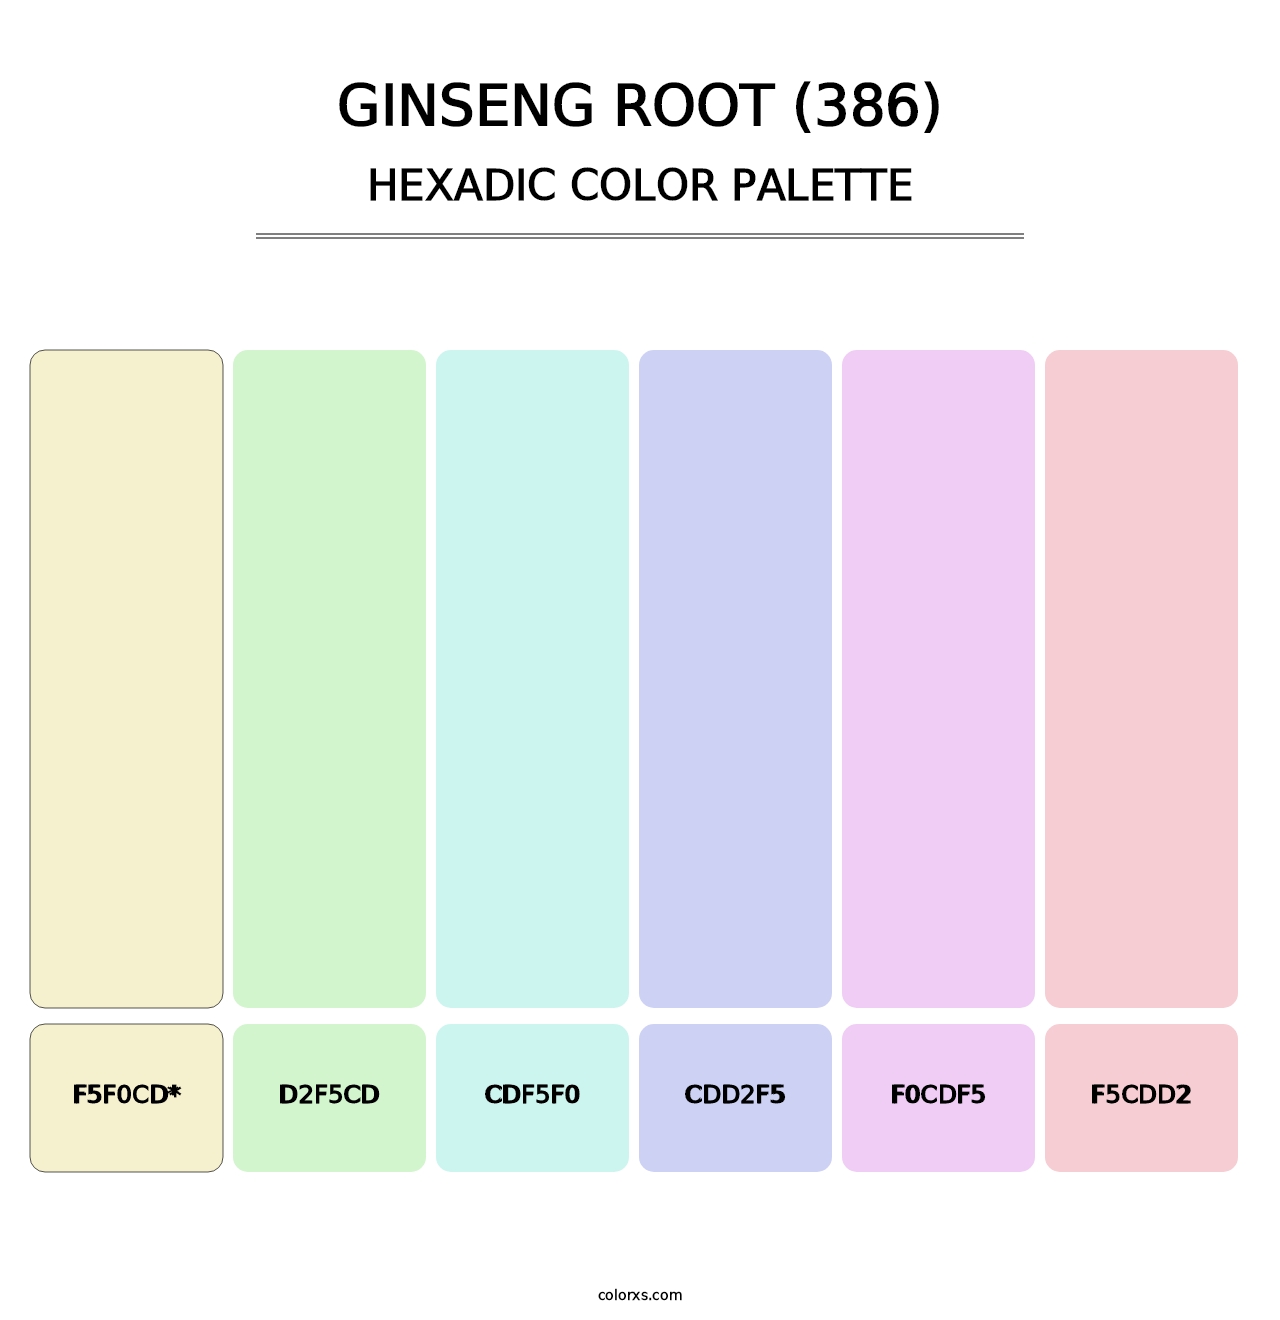 Ginseng Root (386) - Hexadic Color Palette